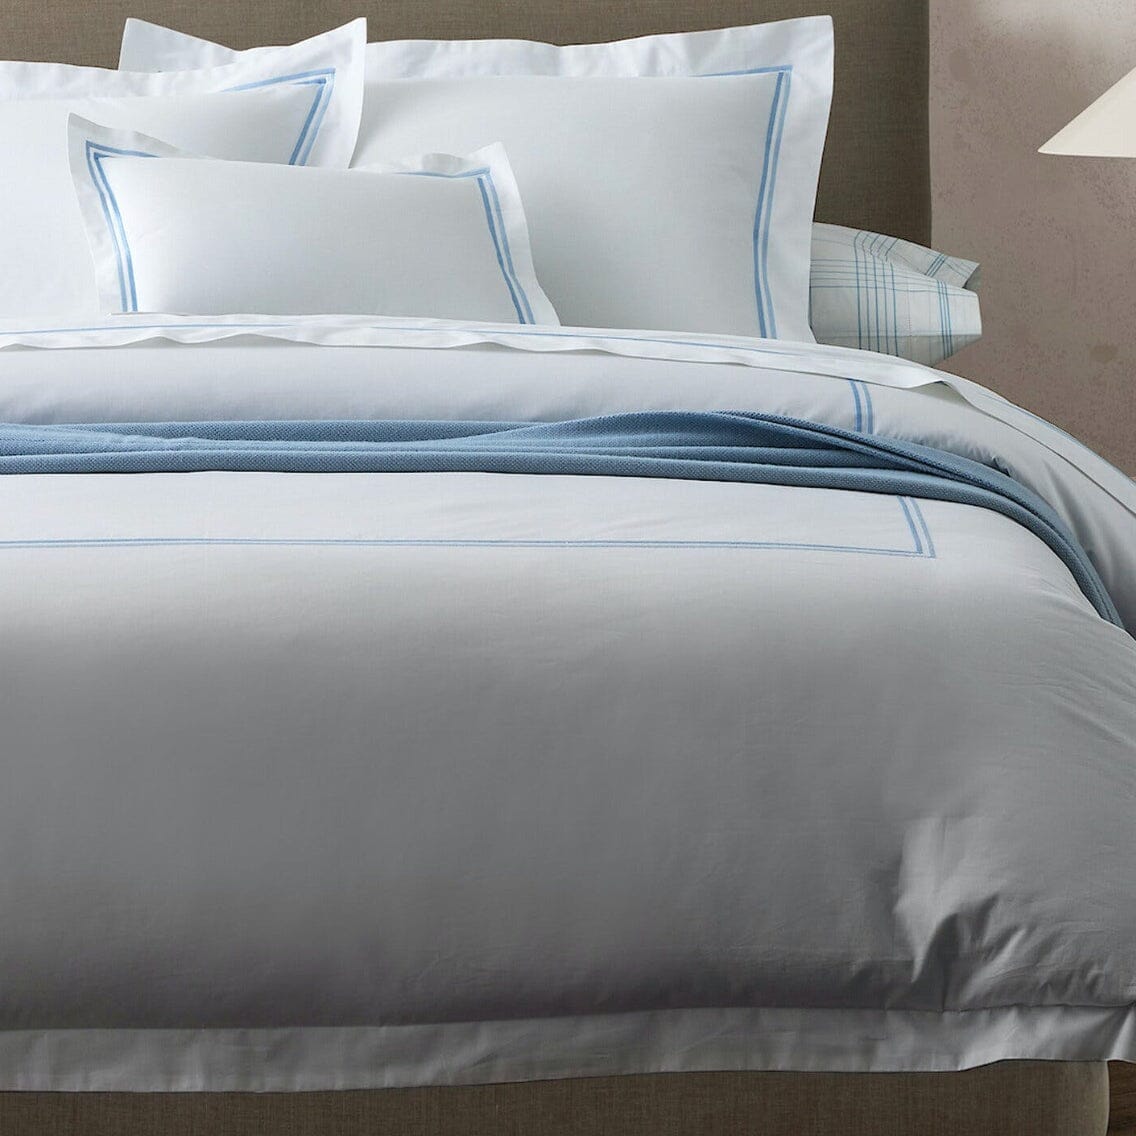 Matouk Essex Light Blue Bedding | Cotton Bed Sheets &amp; Duvet Covers at Fig Linens and Home